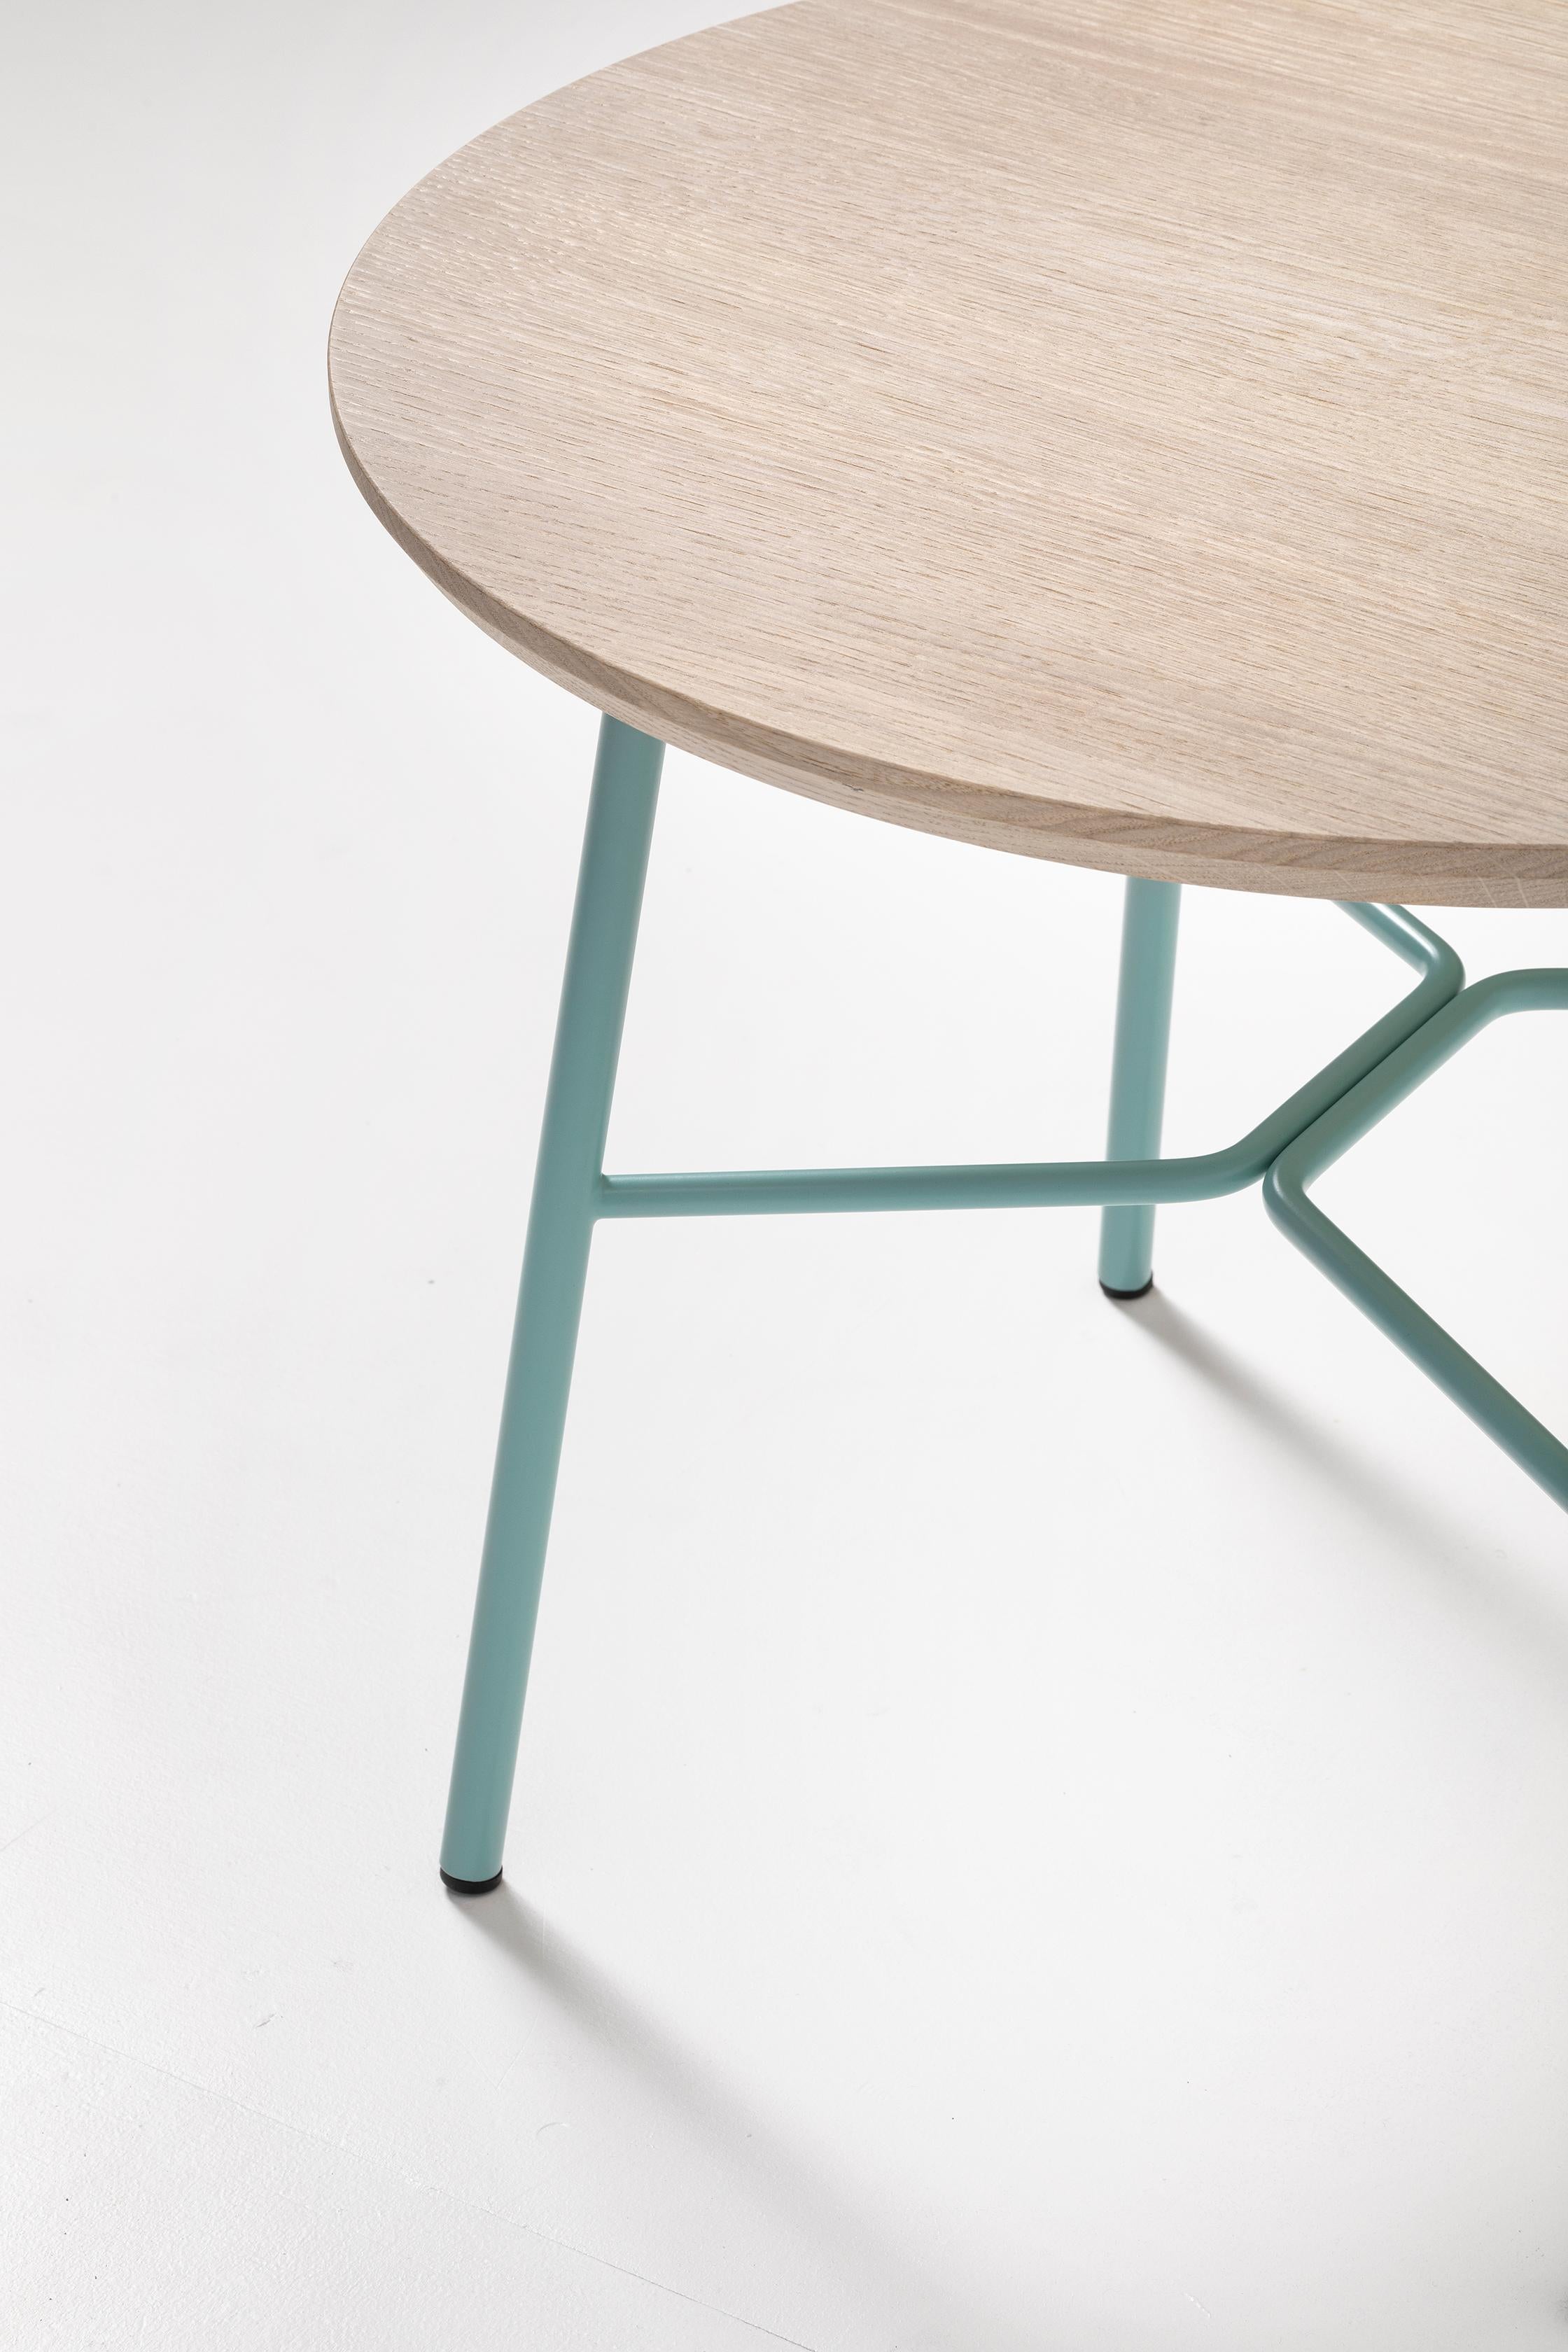 Whether it’s square, rectangular, oval or round, Yuki Little Table comes in several shapes, sizes and finishes. The painted metal base in standard or special colours can be combined with a HPL, marble or glass ceramic top for living spaces in the